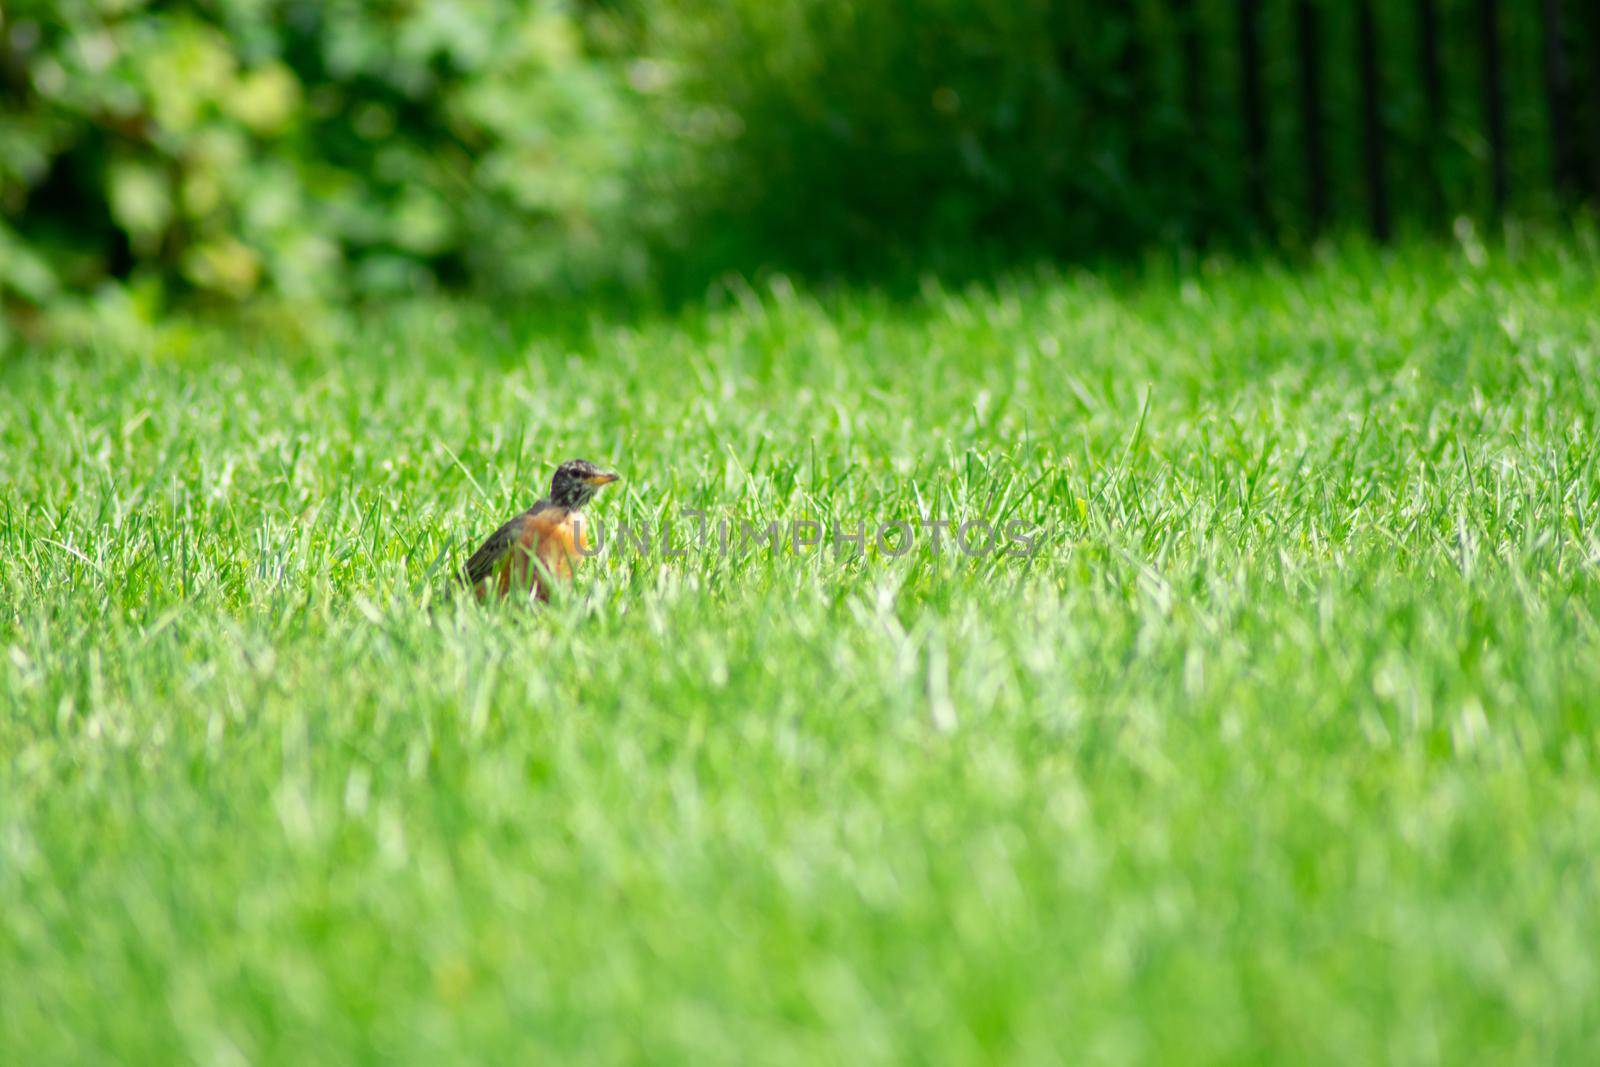 An American Robin in a Bright Green Grass Field by bju12290